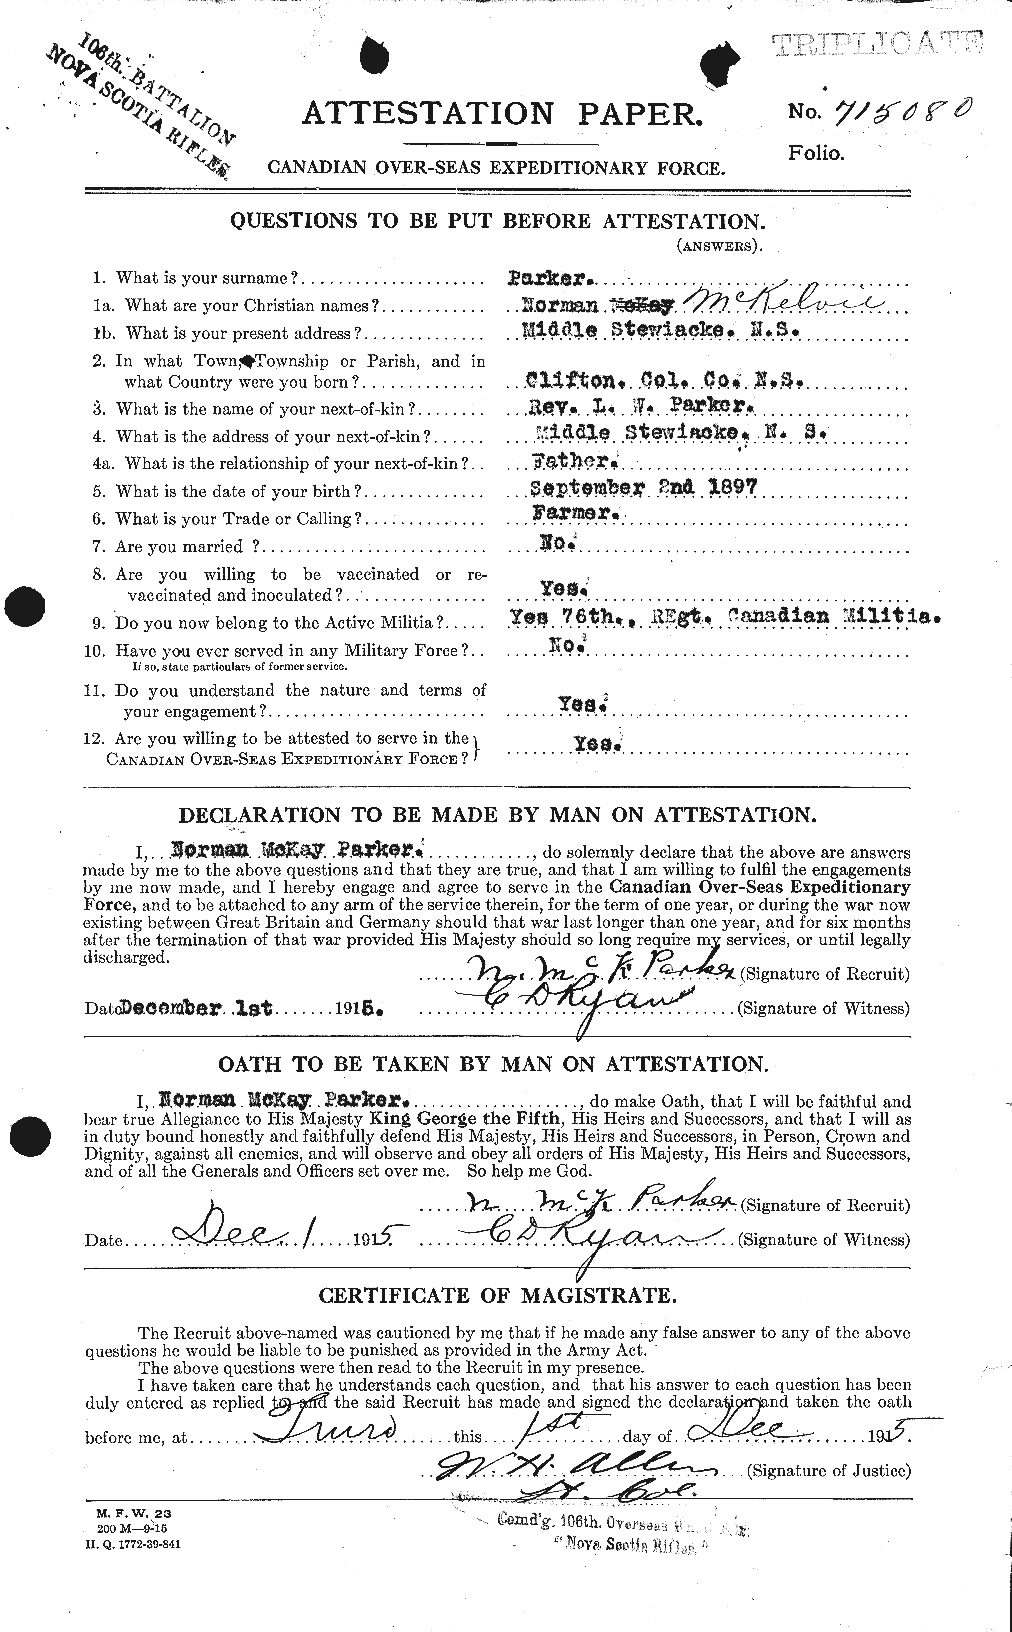 Personnel Records of the First World War - CEF 565549a